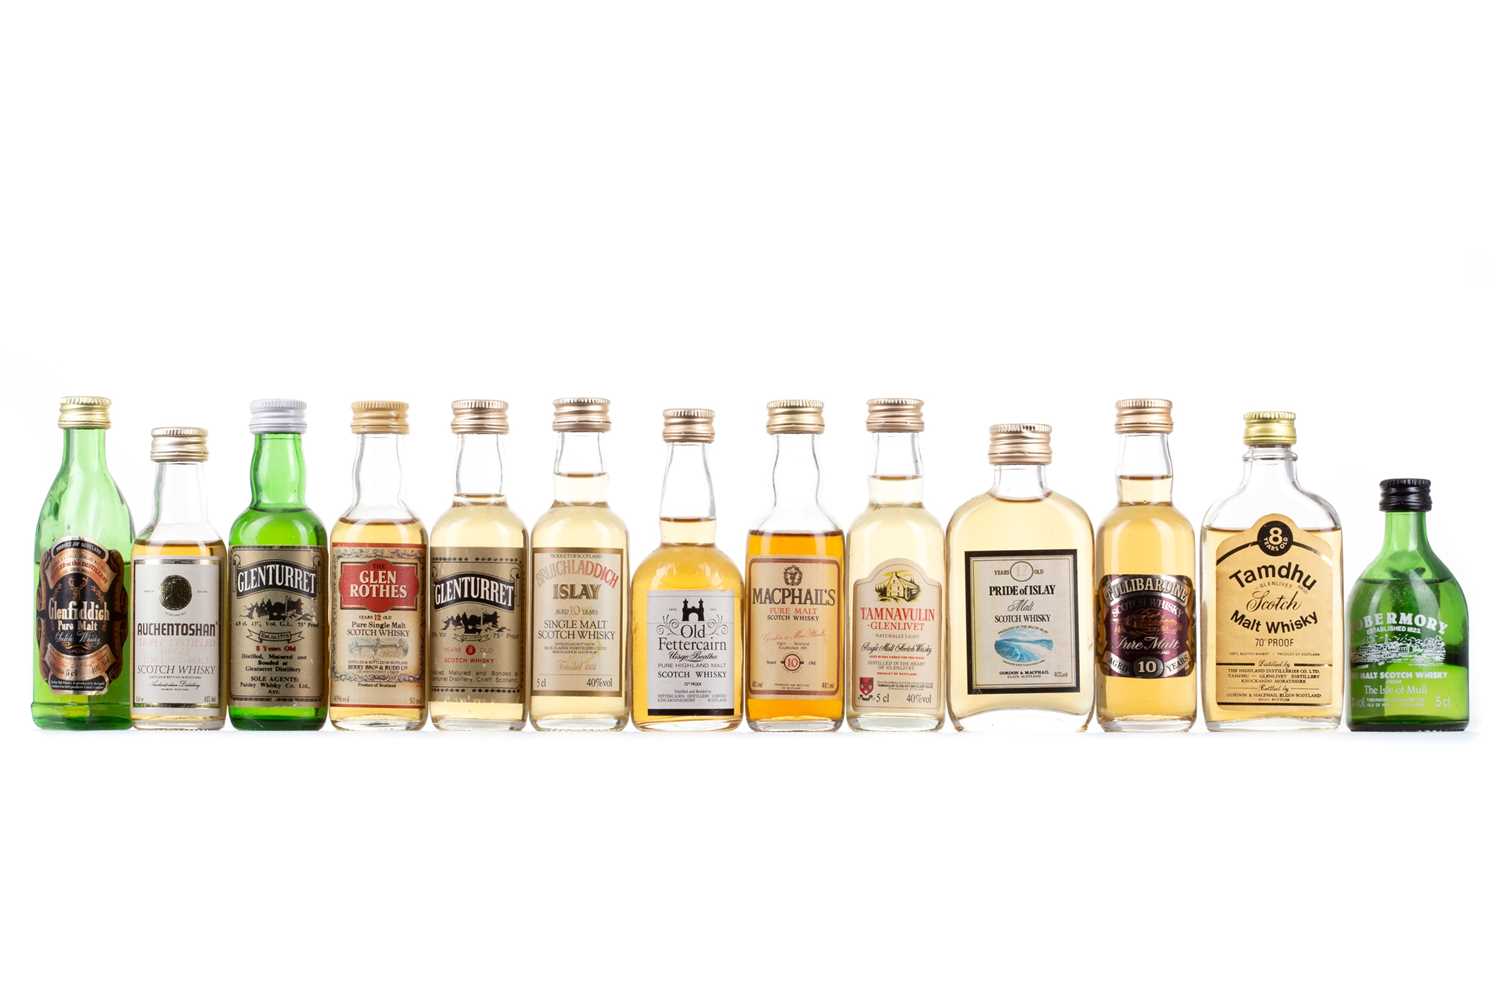 Lot 146 - 20 ASSORTED WHISKY MINIATURES - INCLUDING BALVENIE 10 YEAR OLD FOUNDER'S RESERVE COGNAC BOTTLE